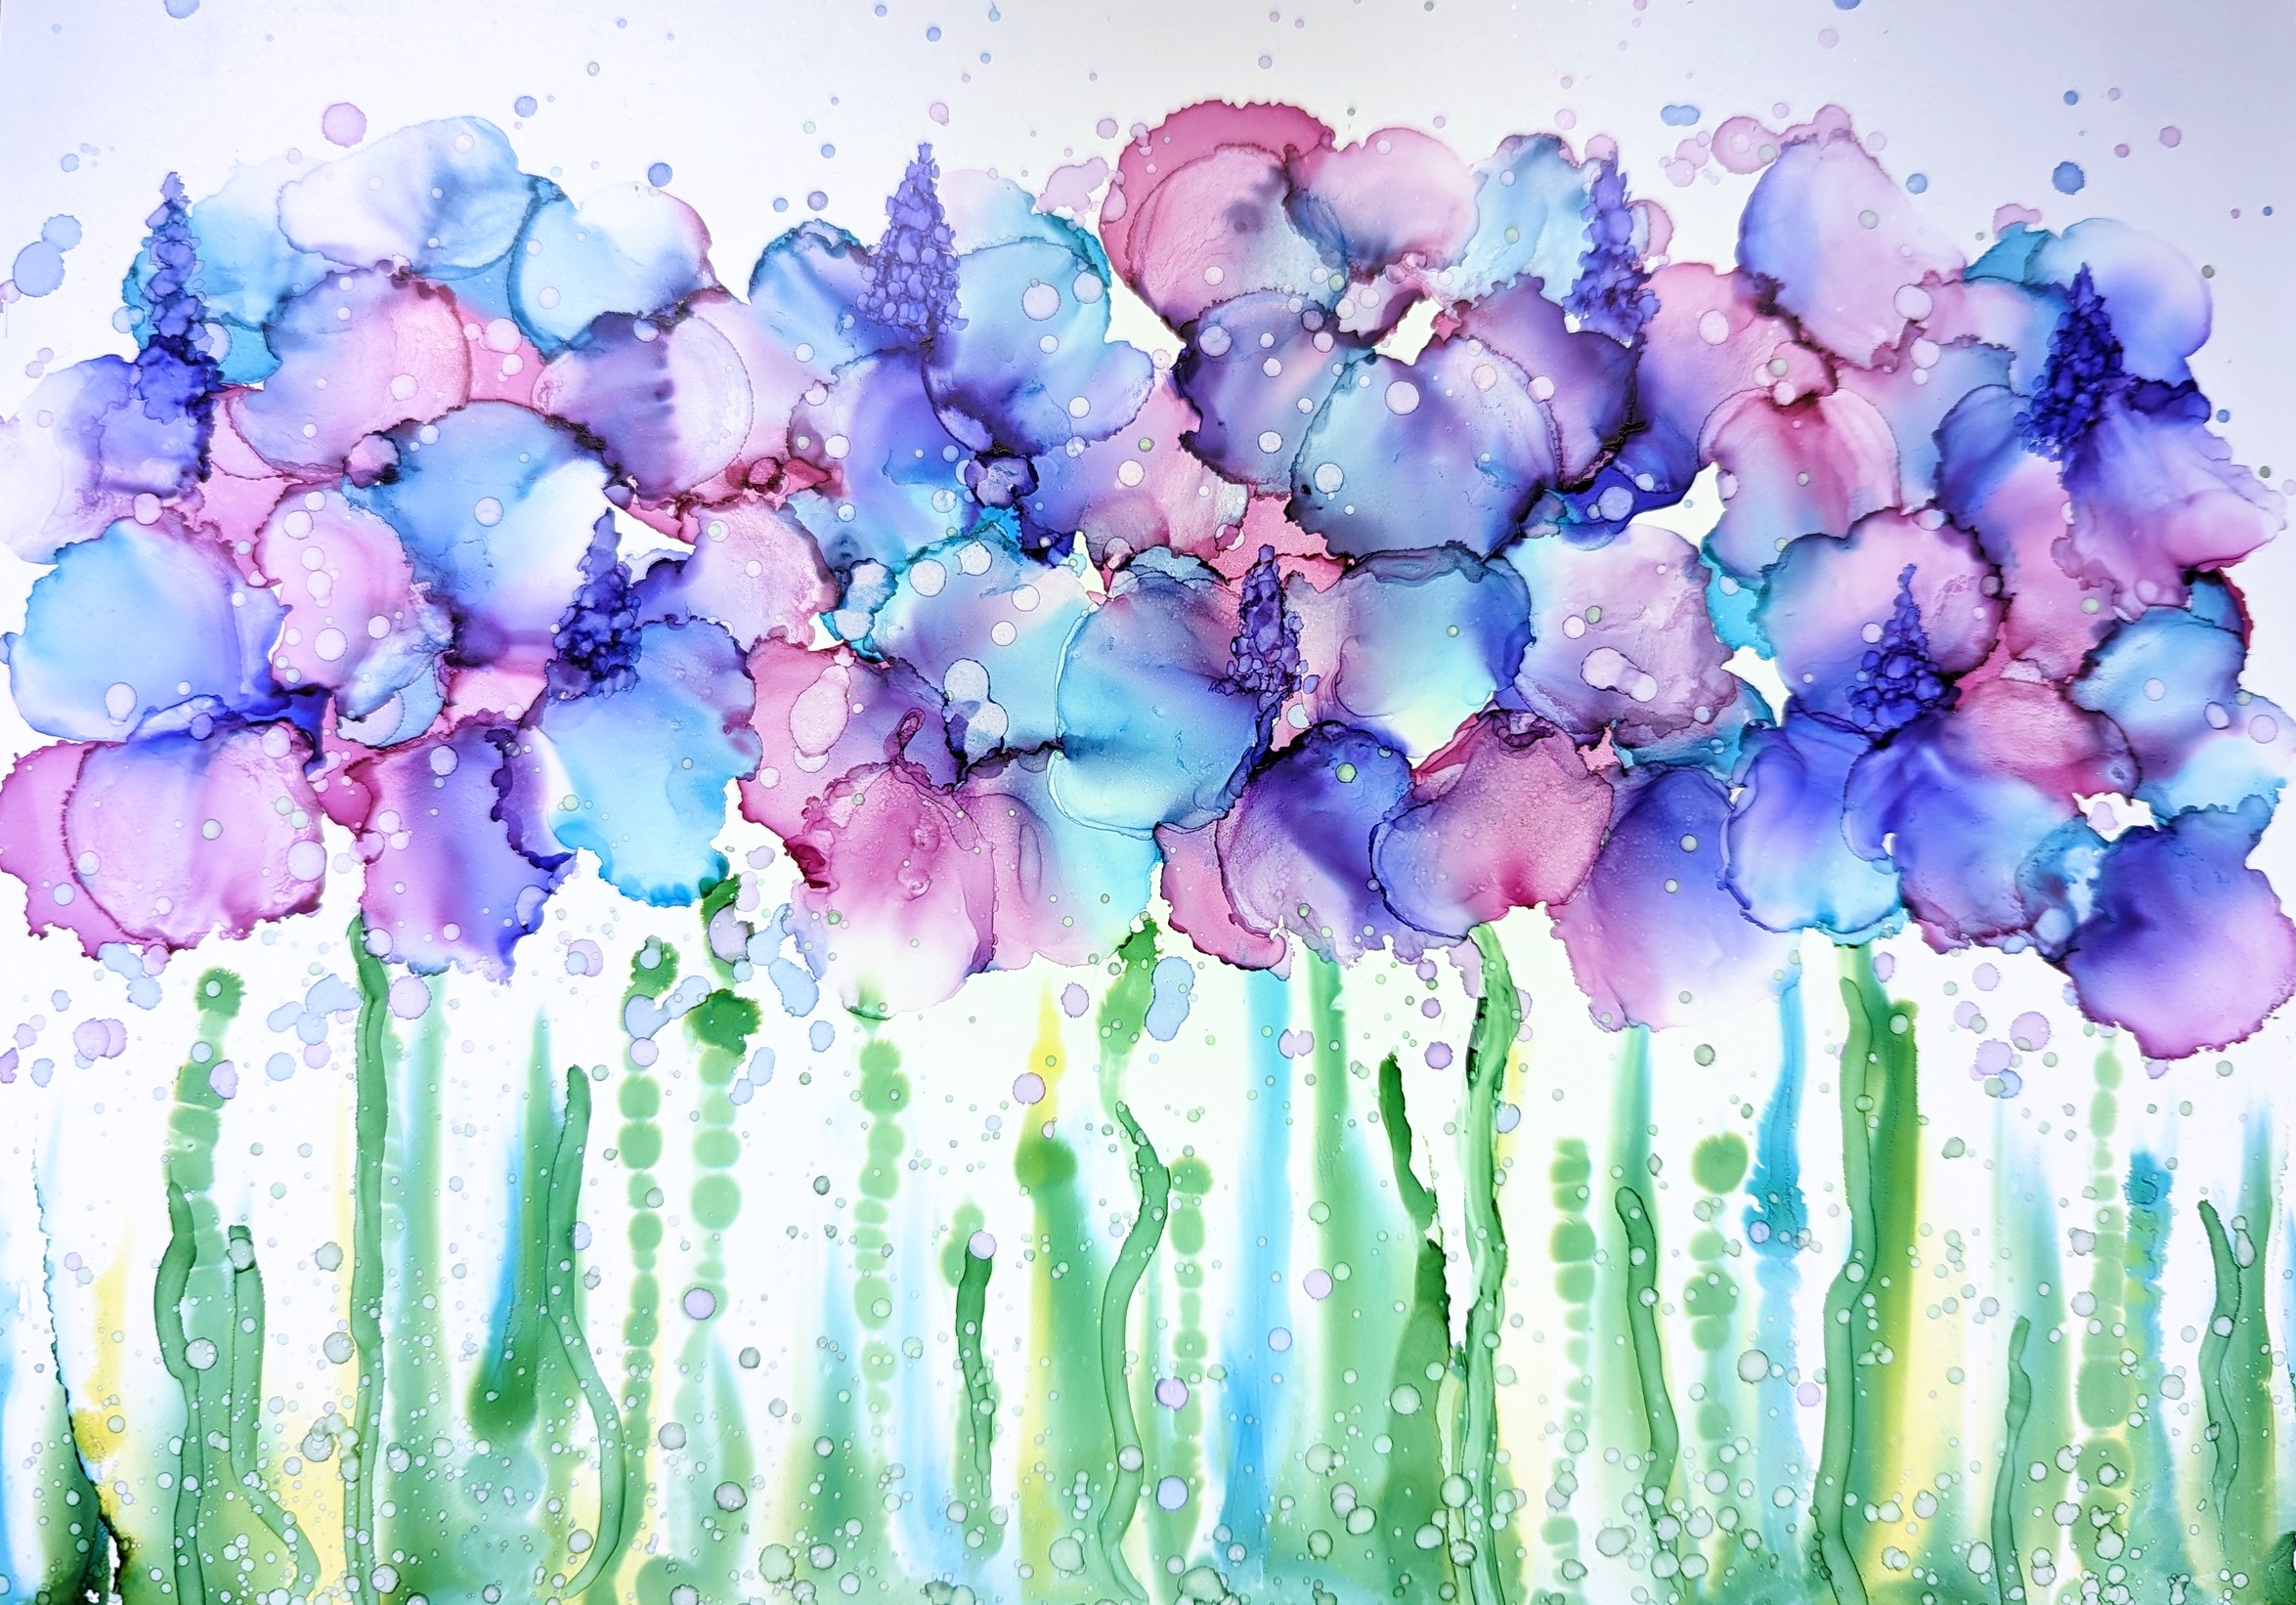 Evening Workshop: An Introduction to Alcohol Ink - Sheffield